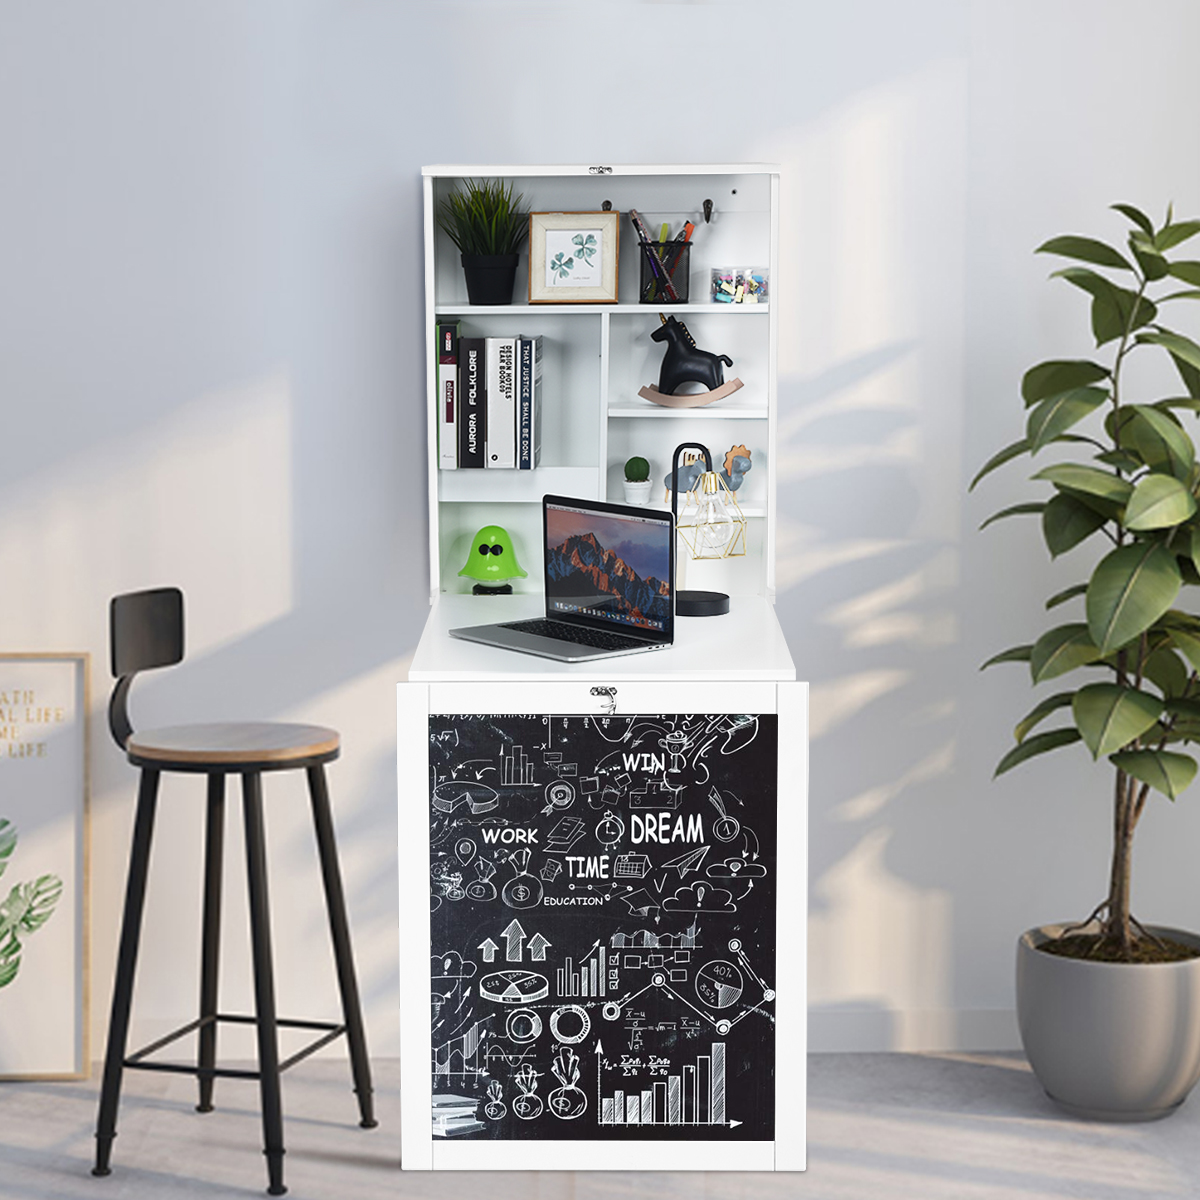 Costway Wall Mounted Table Fold Out Convertible Desk with A Blackboard/Chalkboard White